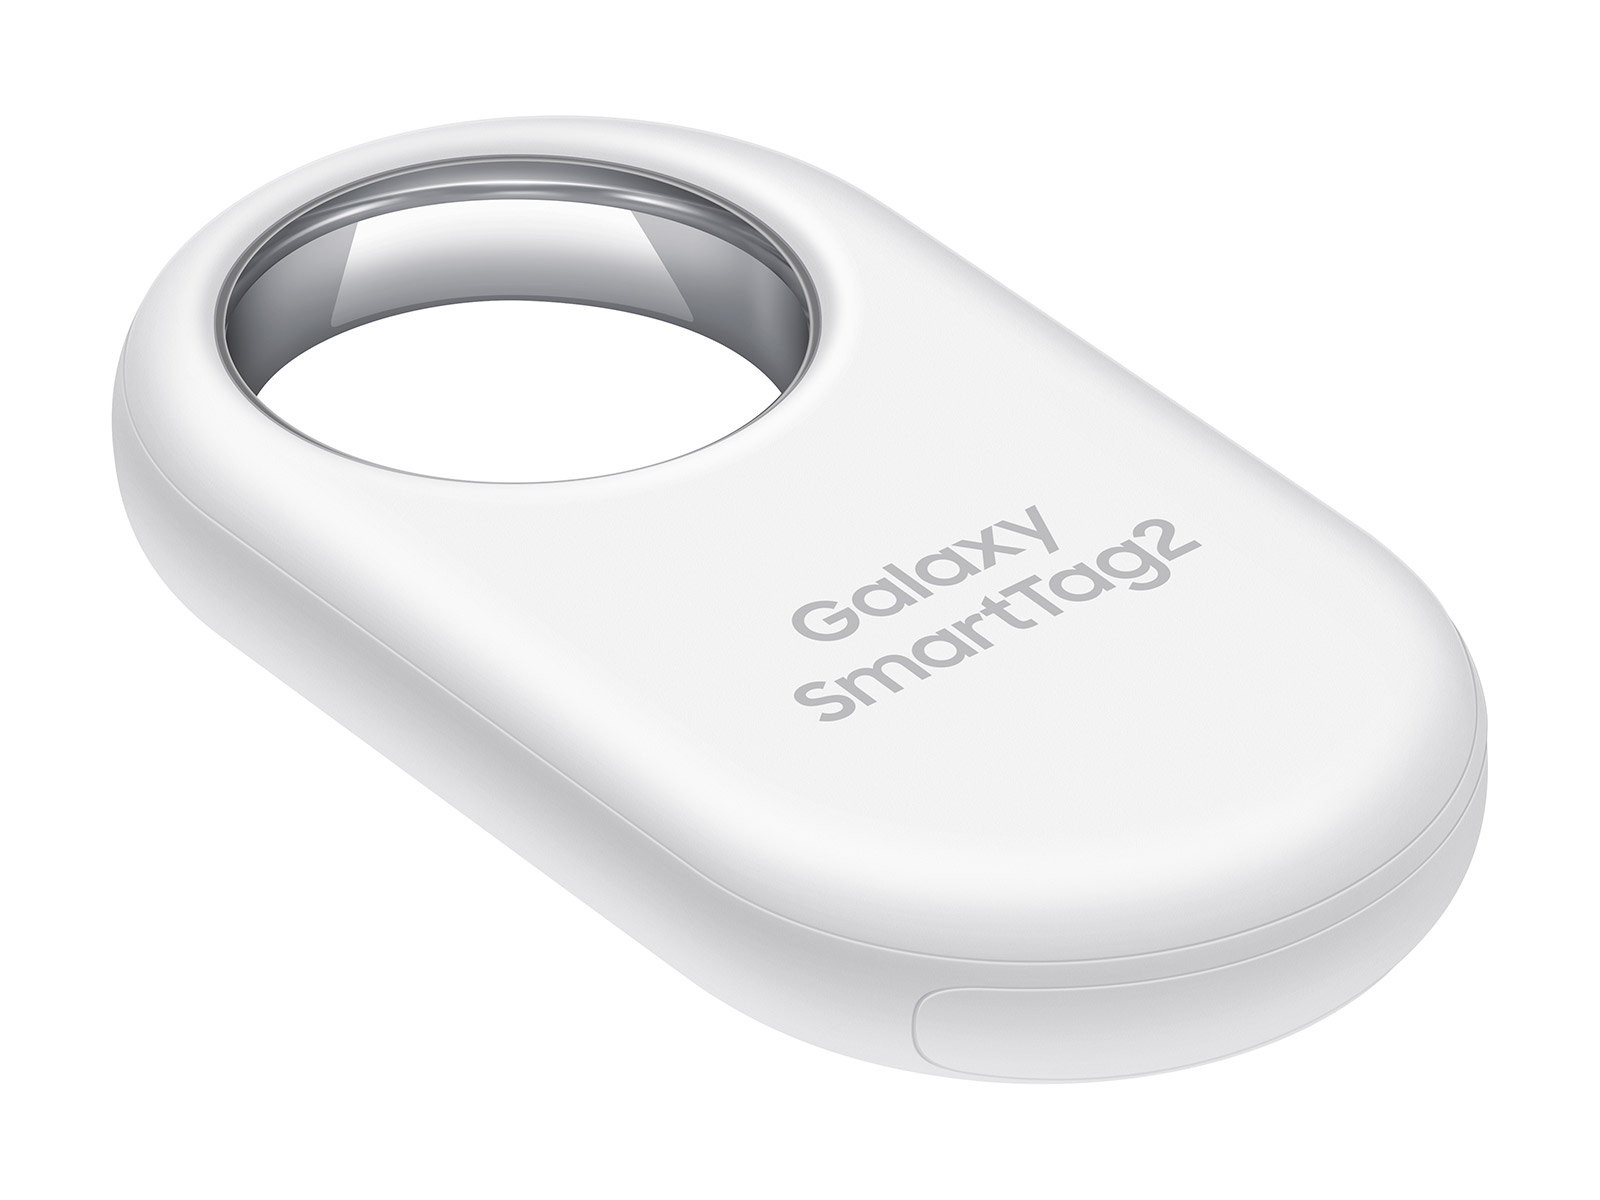 Thumbnail image of Galaxy SmartTag2, 4 Pack, Black and White